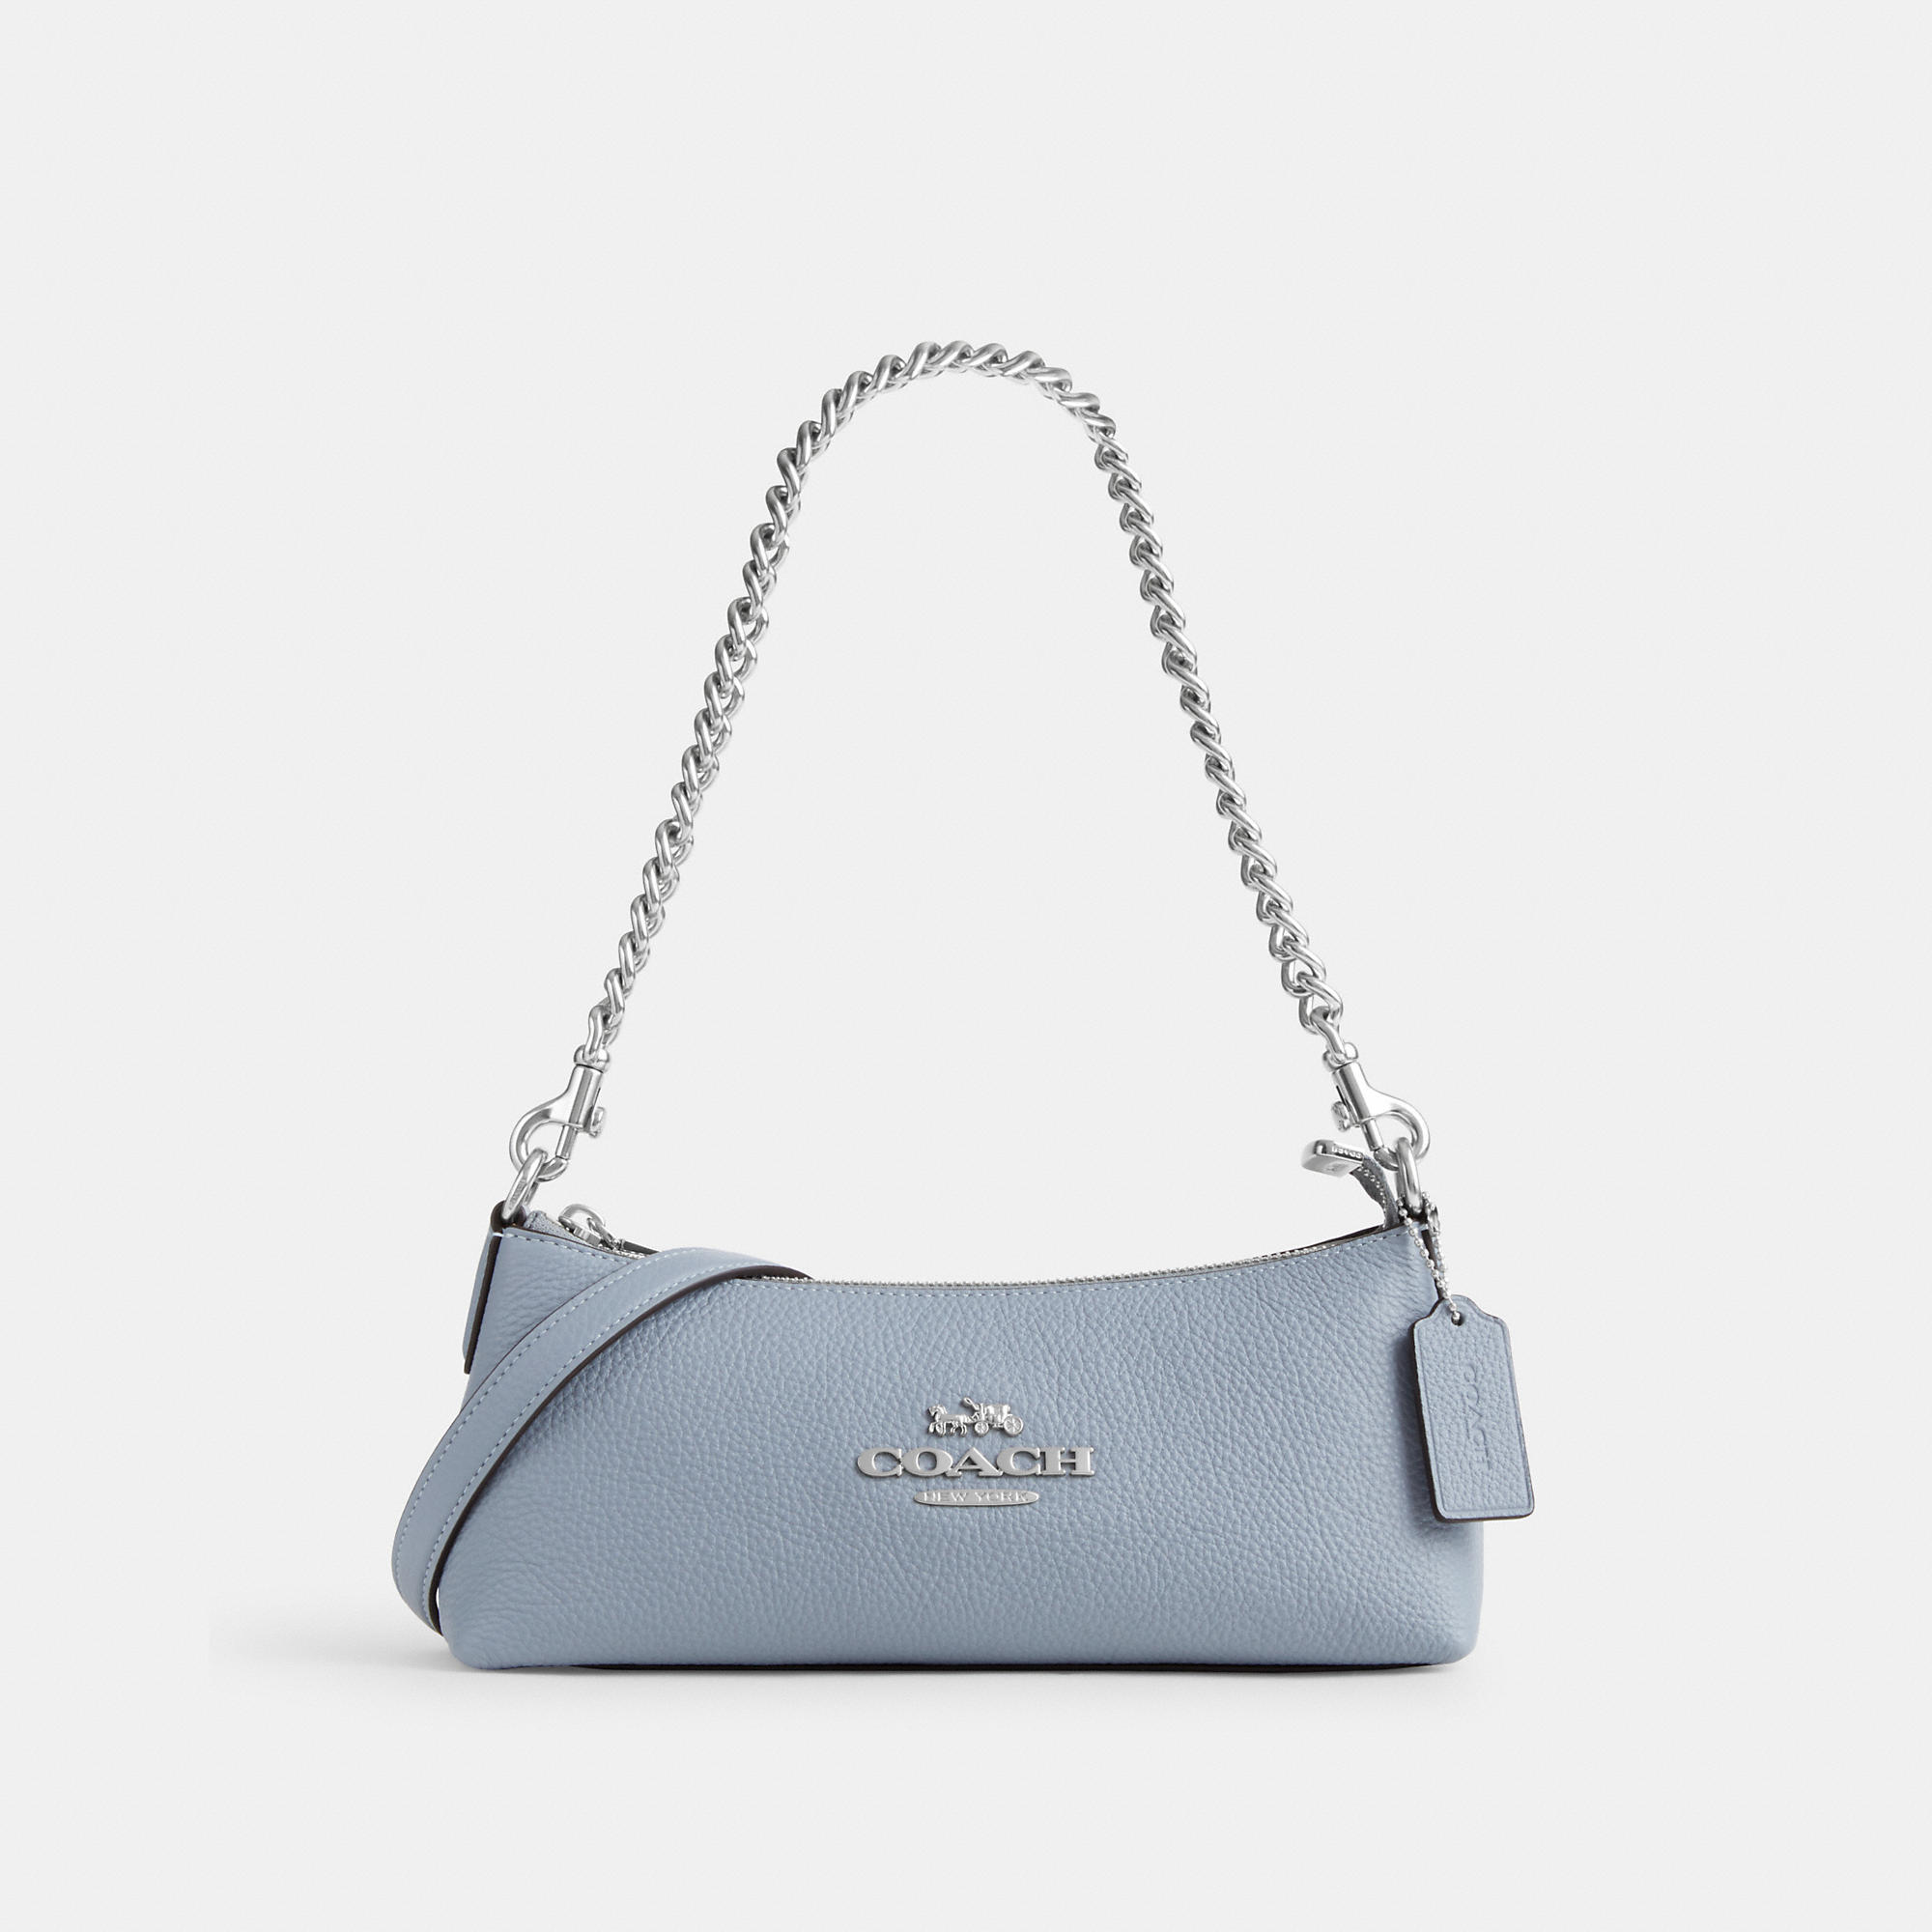 Coach Outlet Gallery Tote - Grey